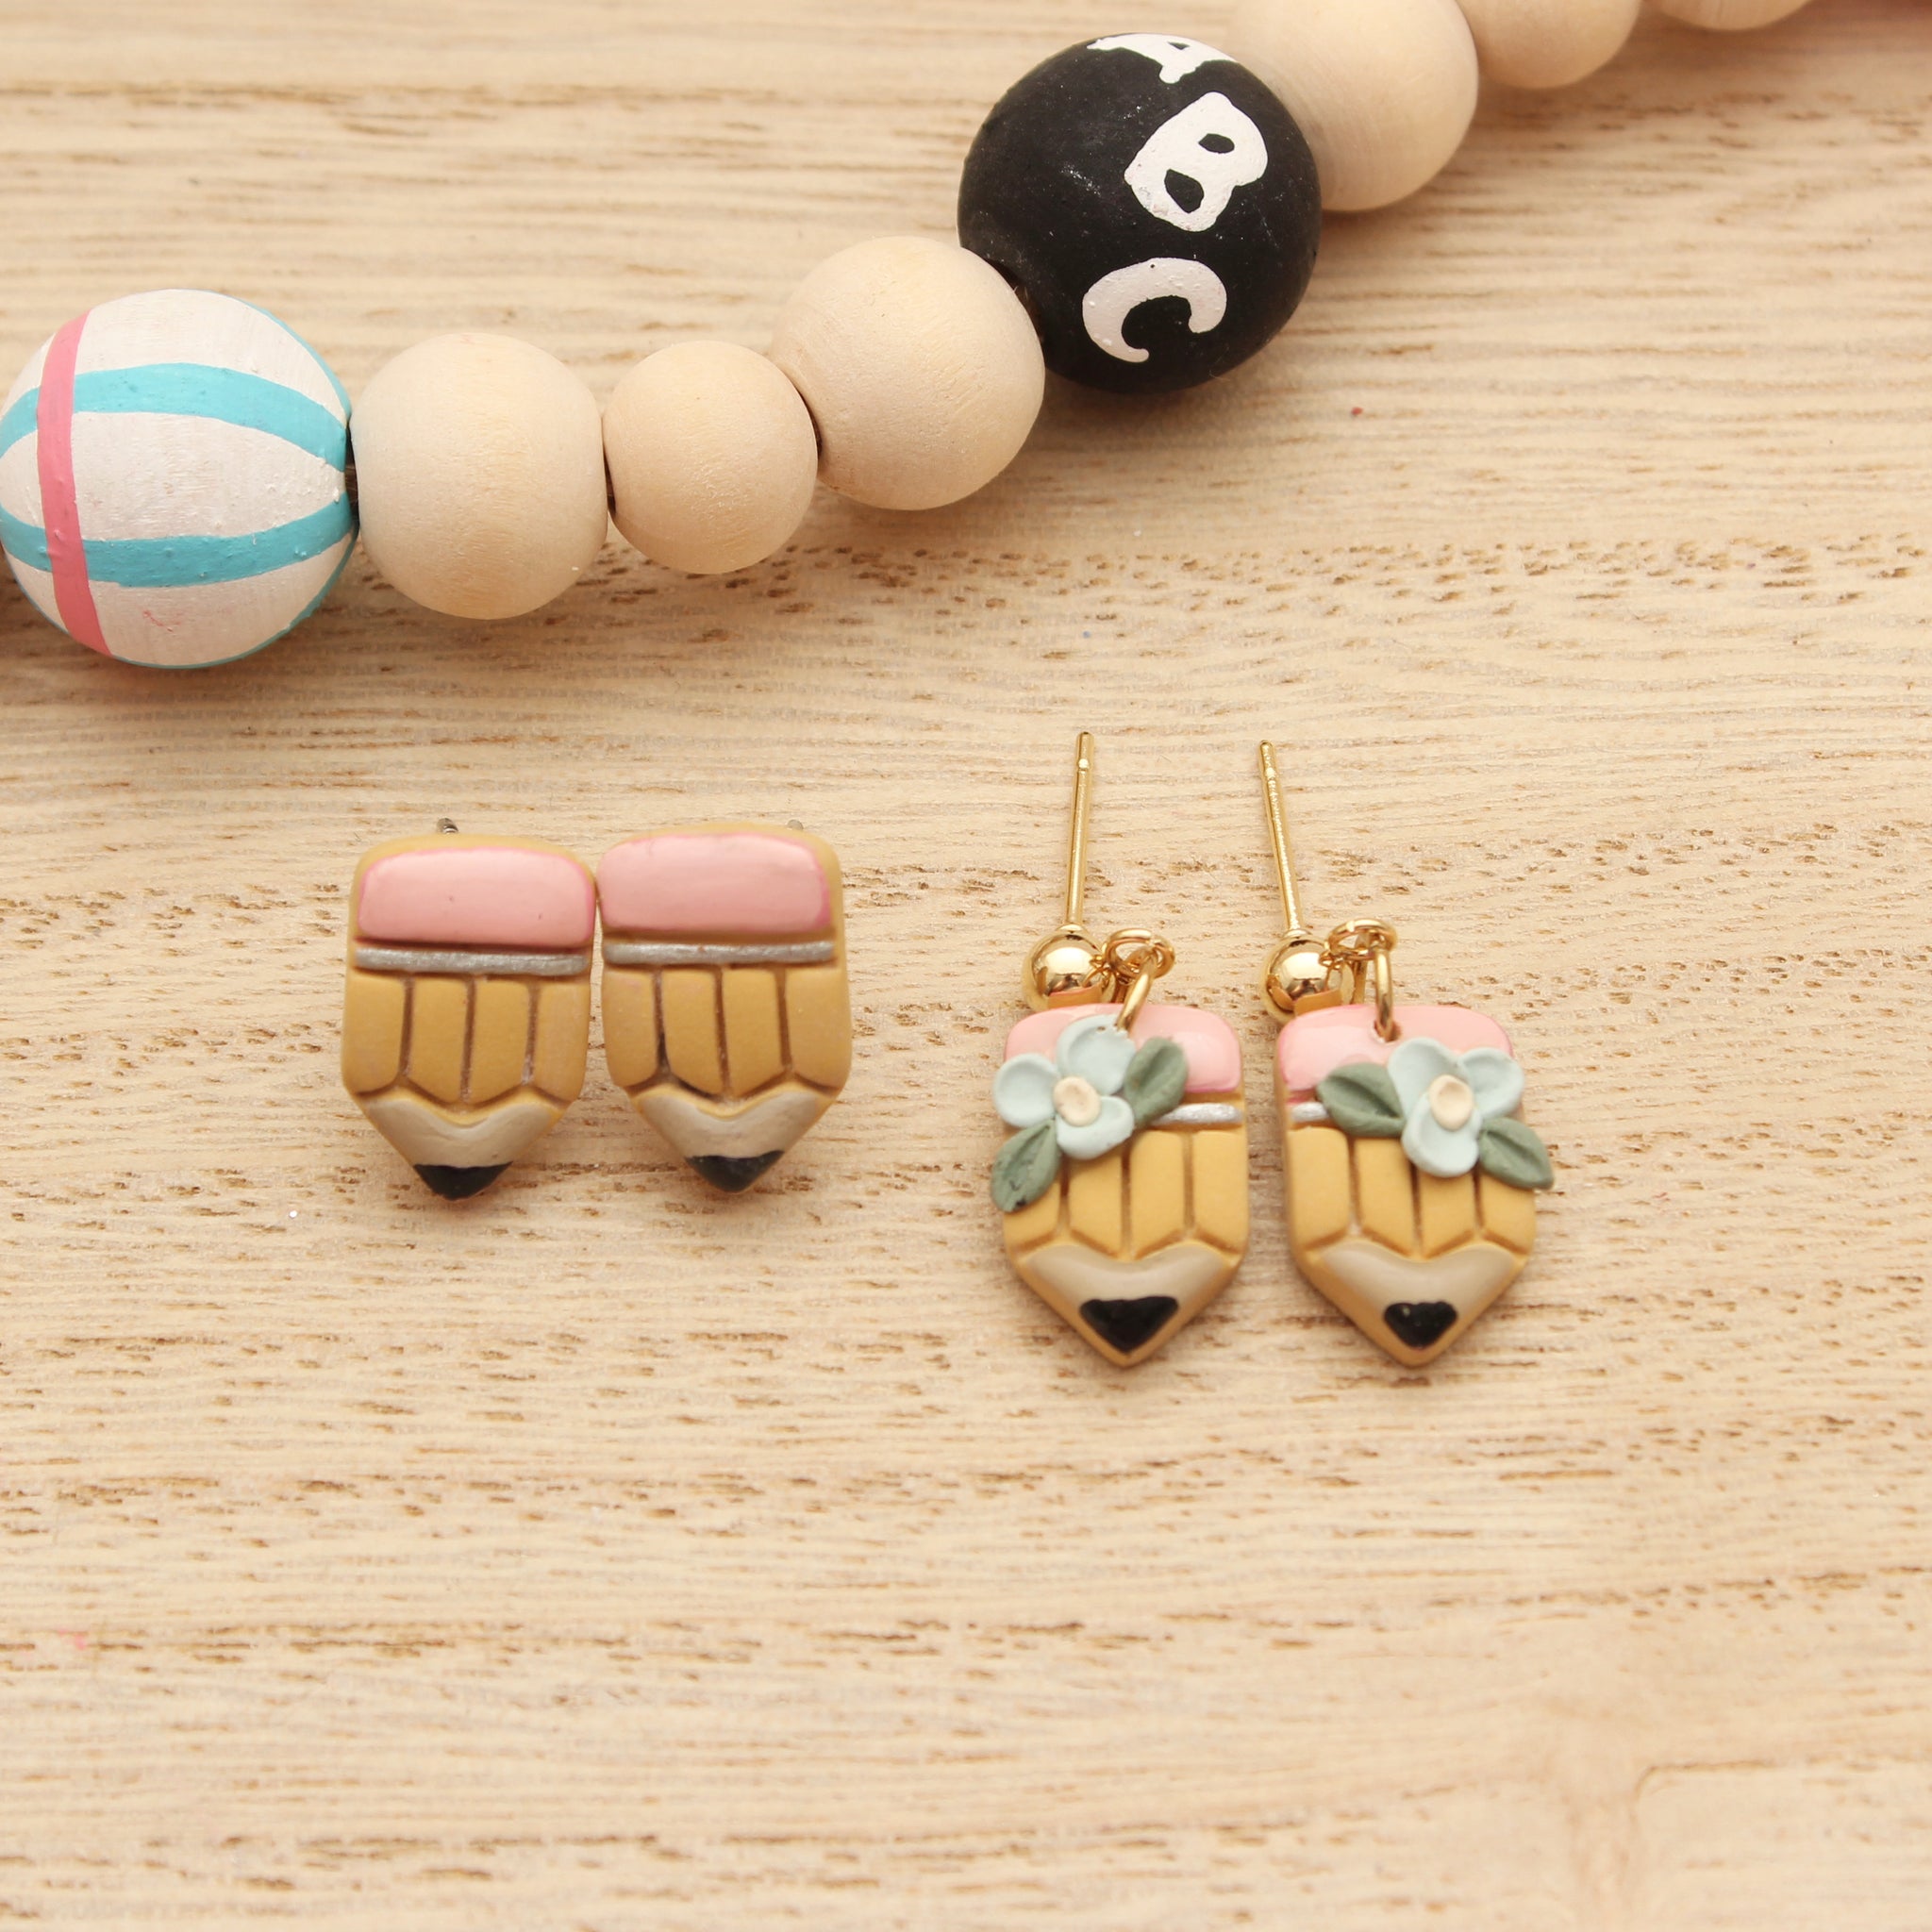 Small Pencil Studs or Dangles Earrings